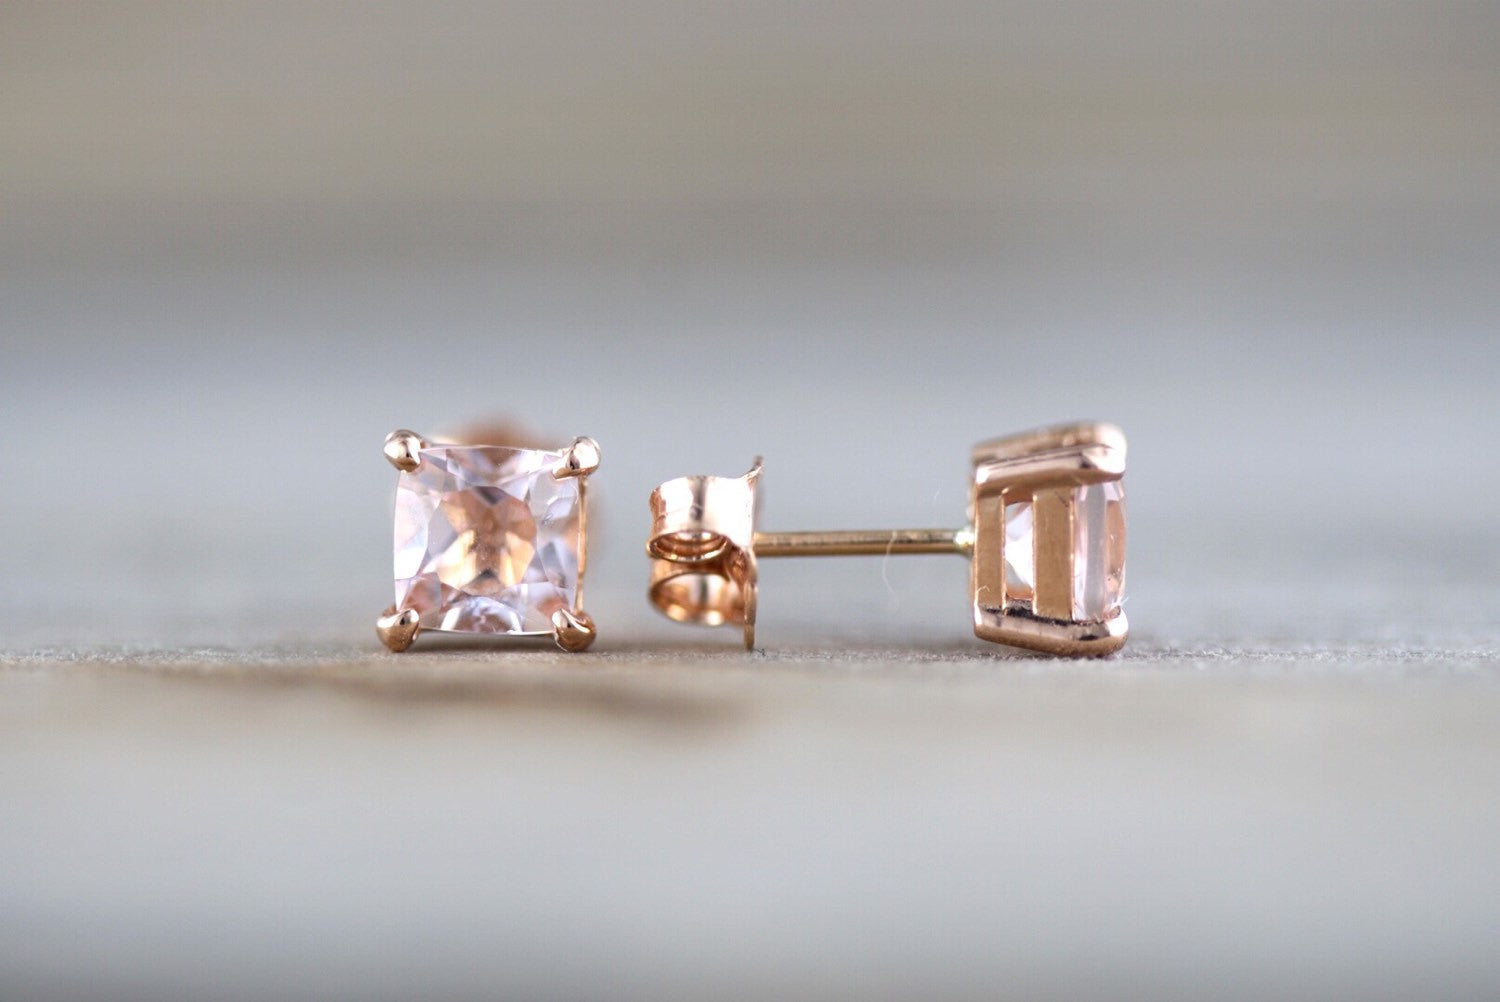 14k Solid Rose Gold Cushion Cut Pink Peach Morganite Earring Studs Post Push Back Square Post Stud - Brilliant Facets